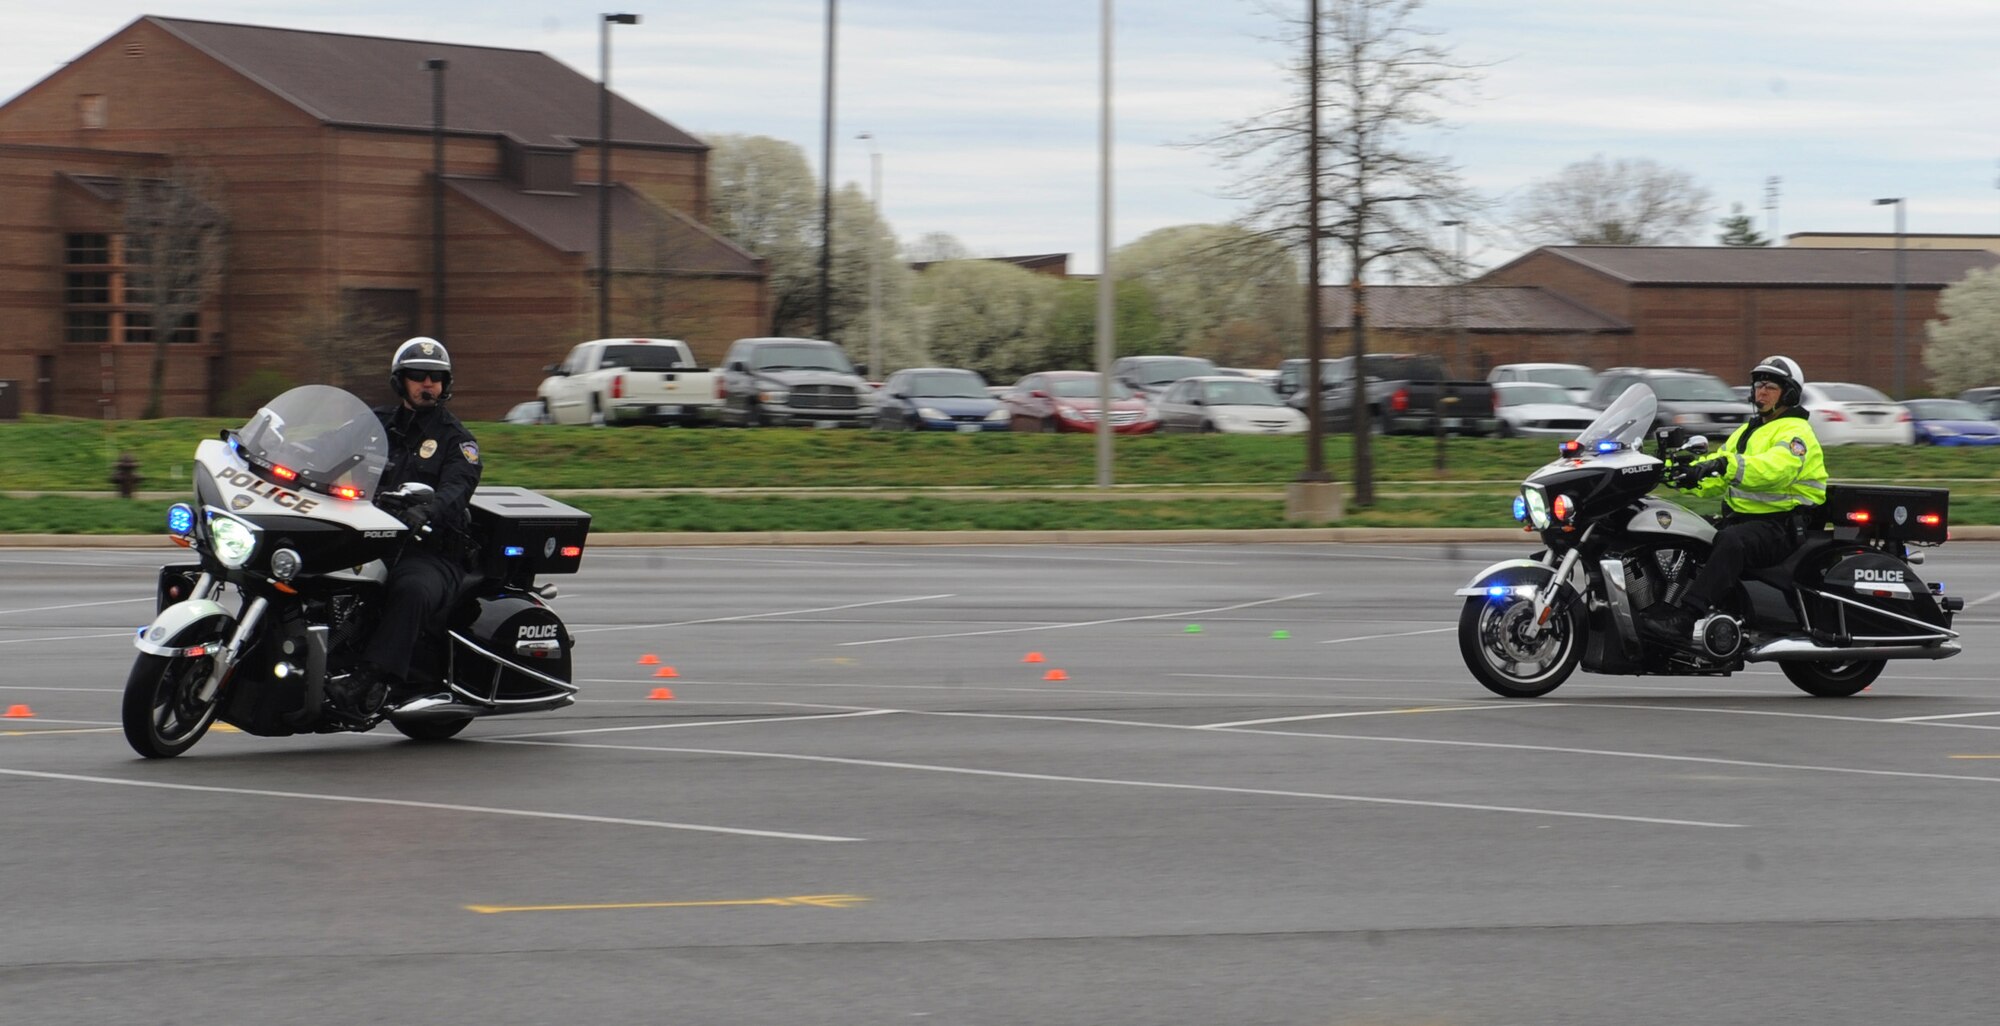 Members of the Lee’s Summit Police Department navigate “Grant’s Gauntlet” during the annual Motorcycle Awareness and Safety Day at Whiteman Air Force Base, Mo., April 15, 2013. Grant’s Gauntlet is a timed riding course that tests stopping and turning skills of riders.  (U.S. Air Force photo by Airman 1st Class Bryan Crane/Released)